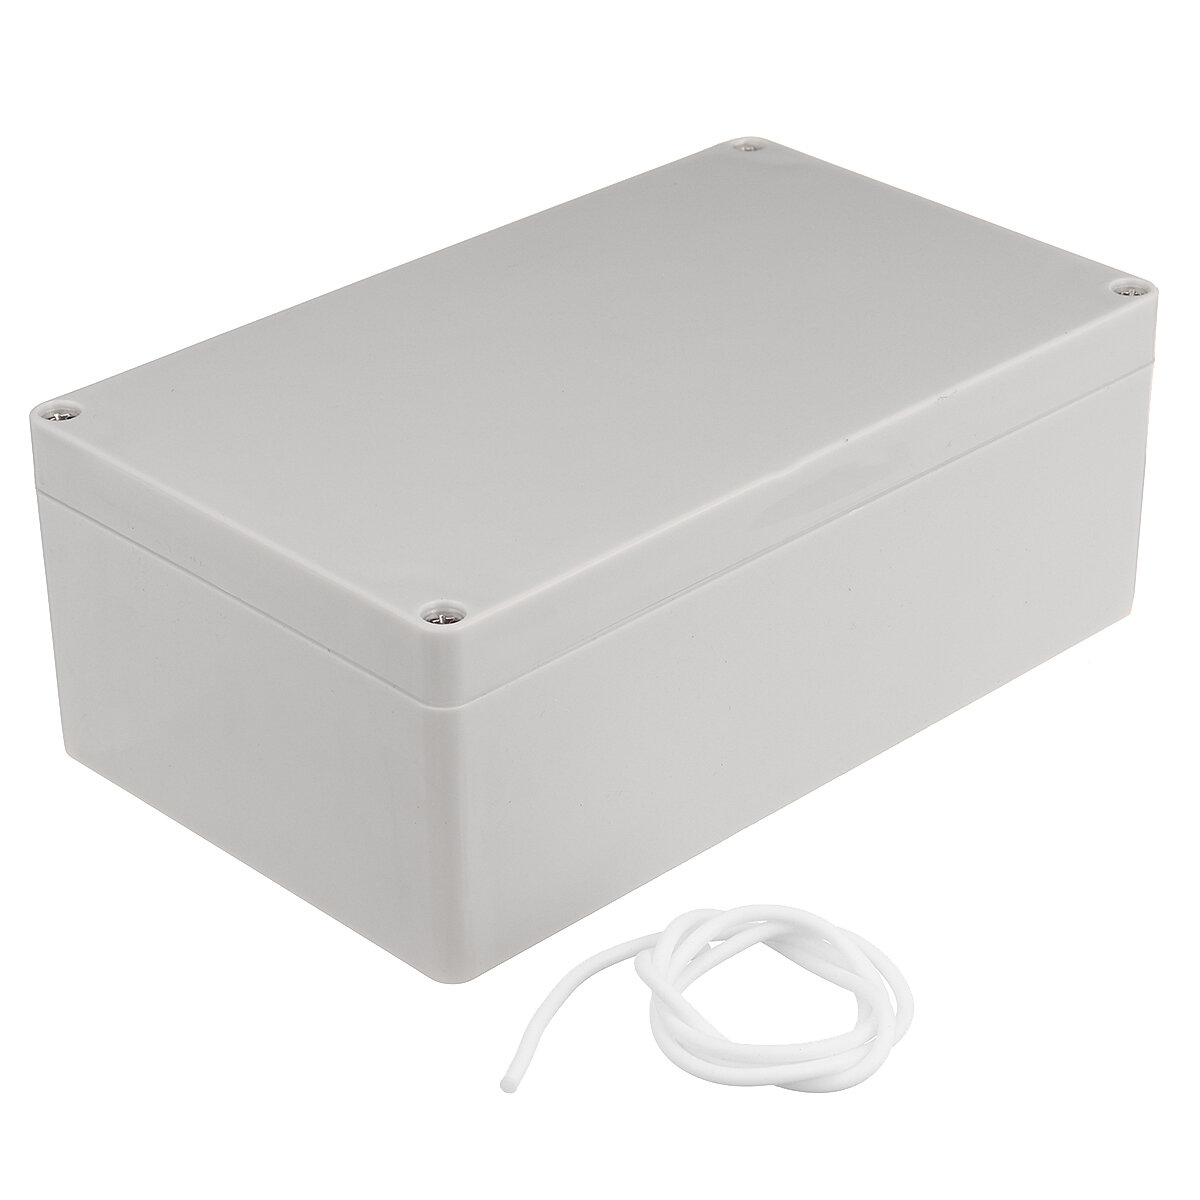 

Waterproof Plastic Enclosure Box Electronic Project Case Electrical Project Box Outdoor Junction Box